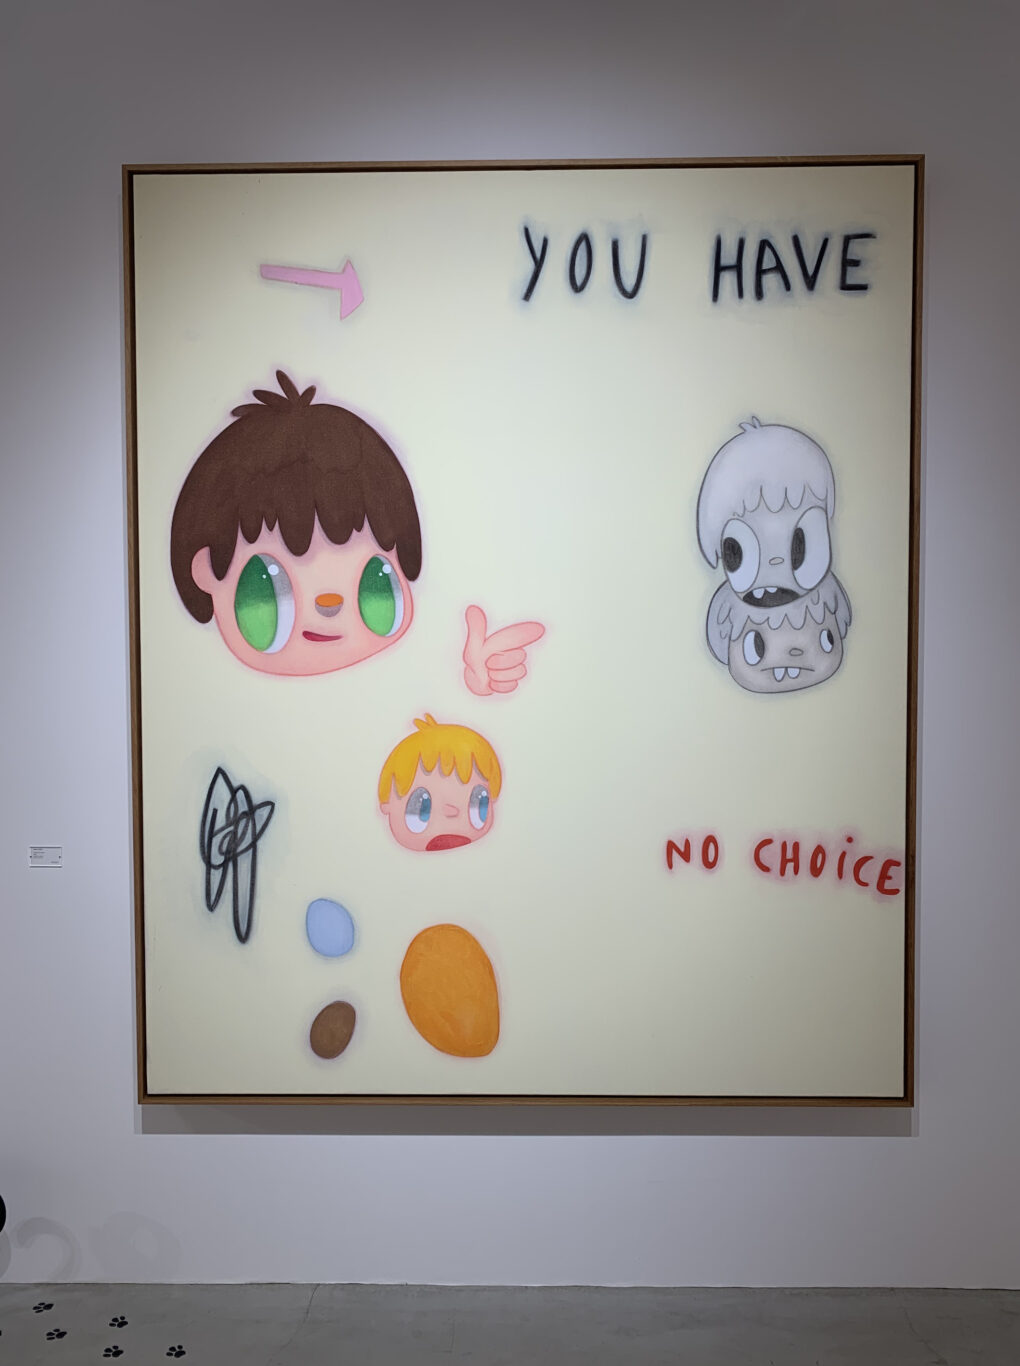  Javier Calleja    「You have no choice」　2018   Acrylic on canvas  H195×W162cm 